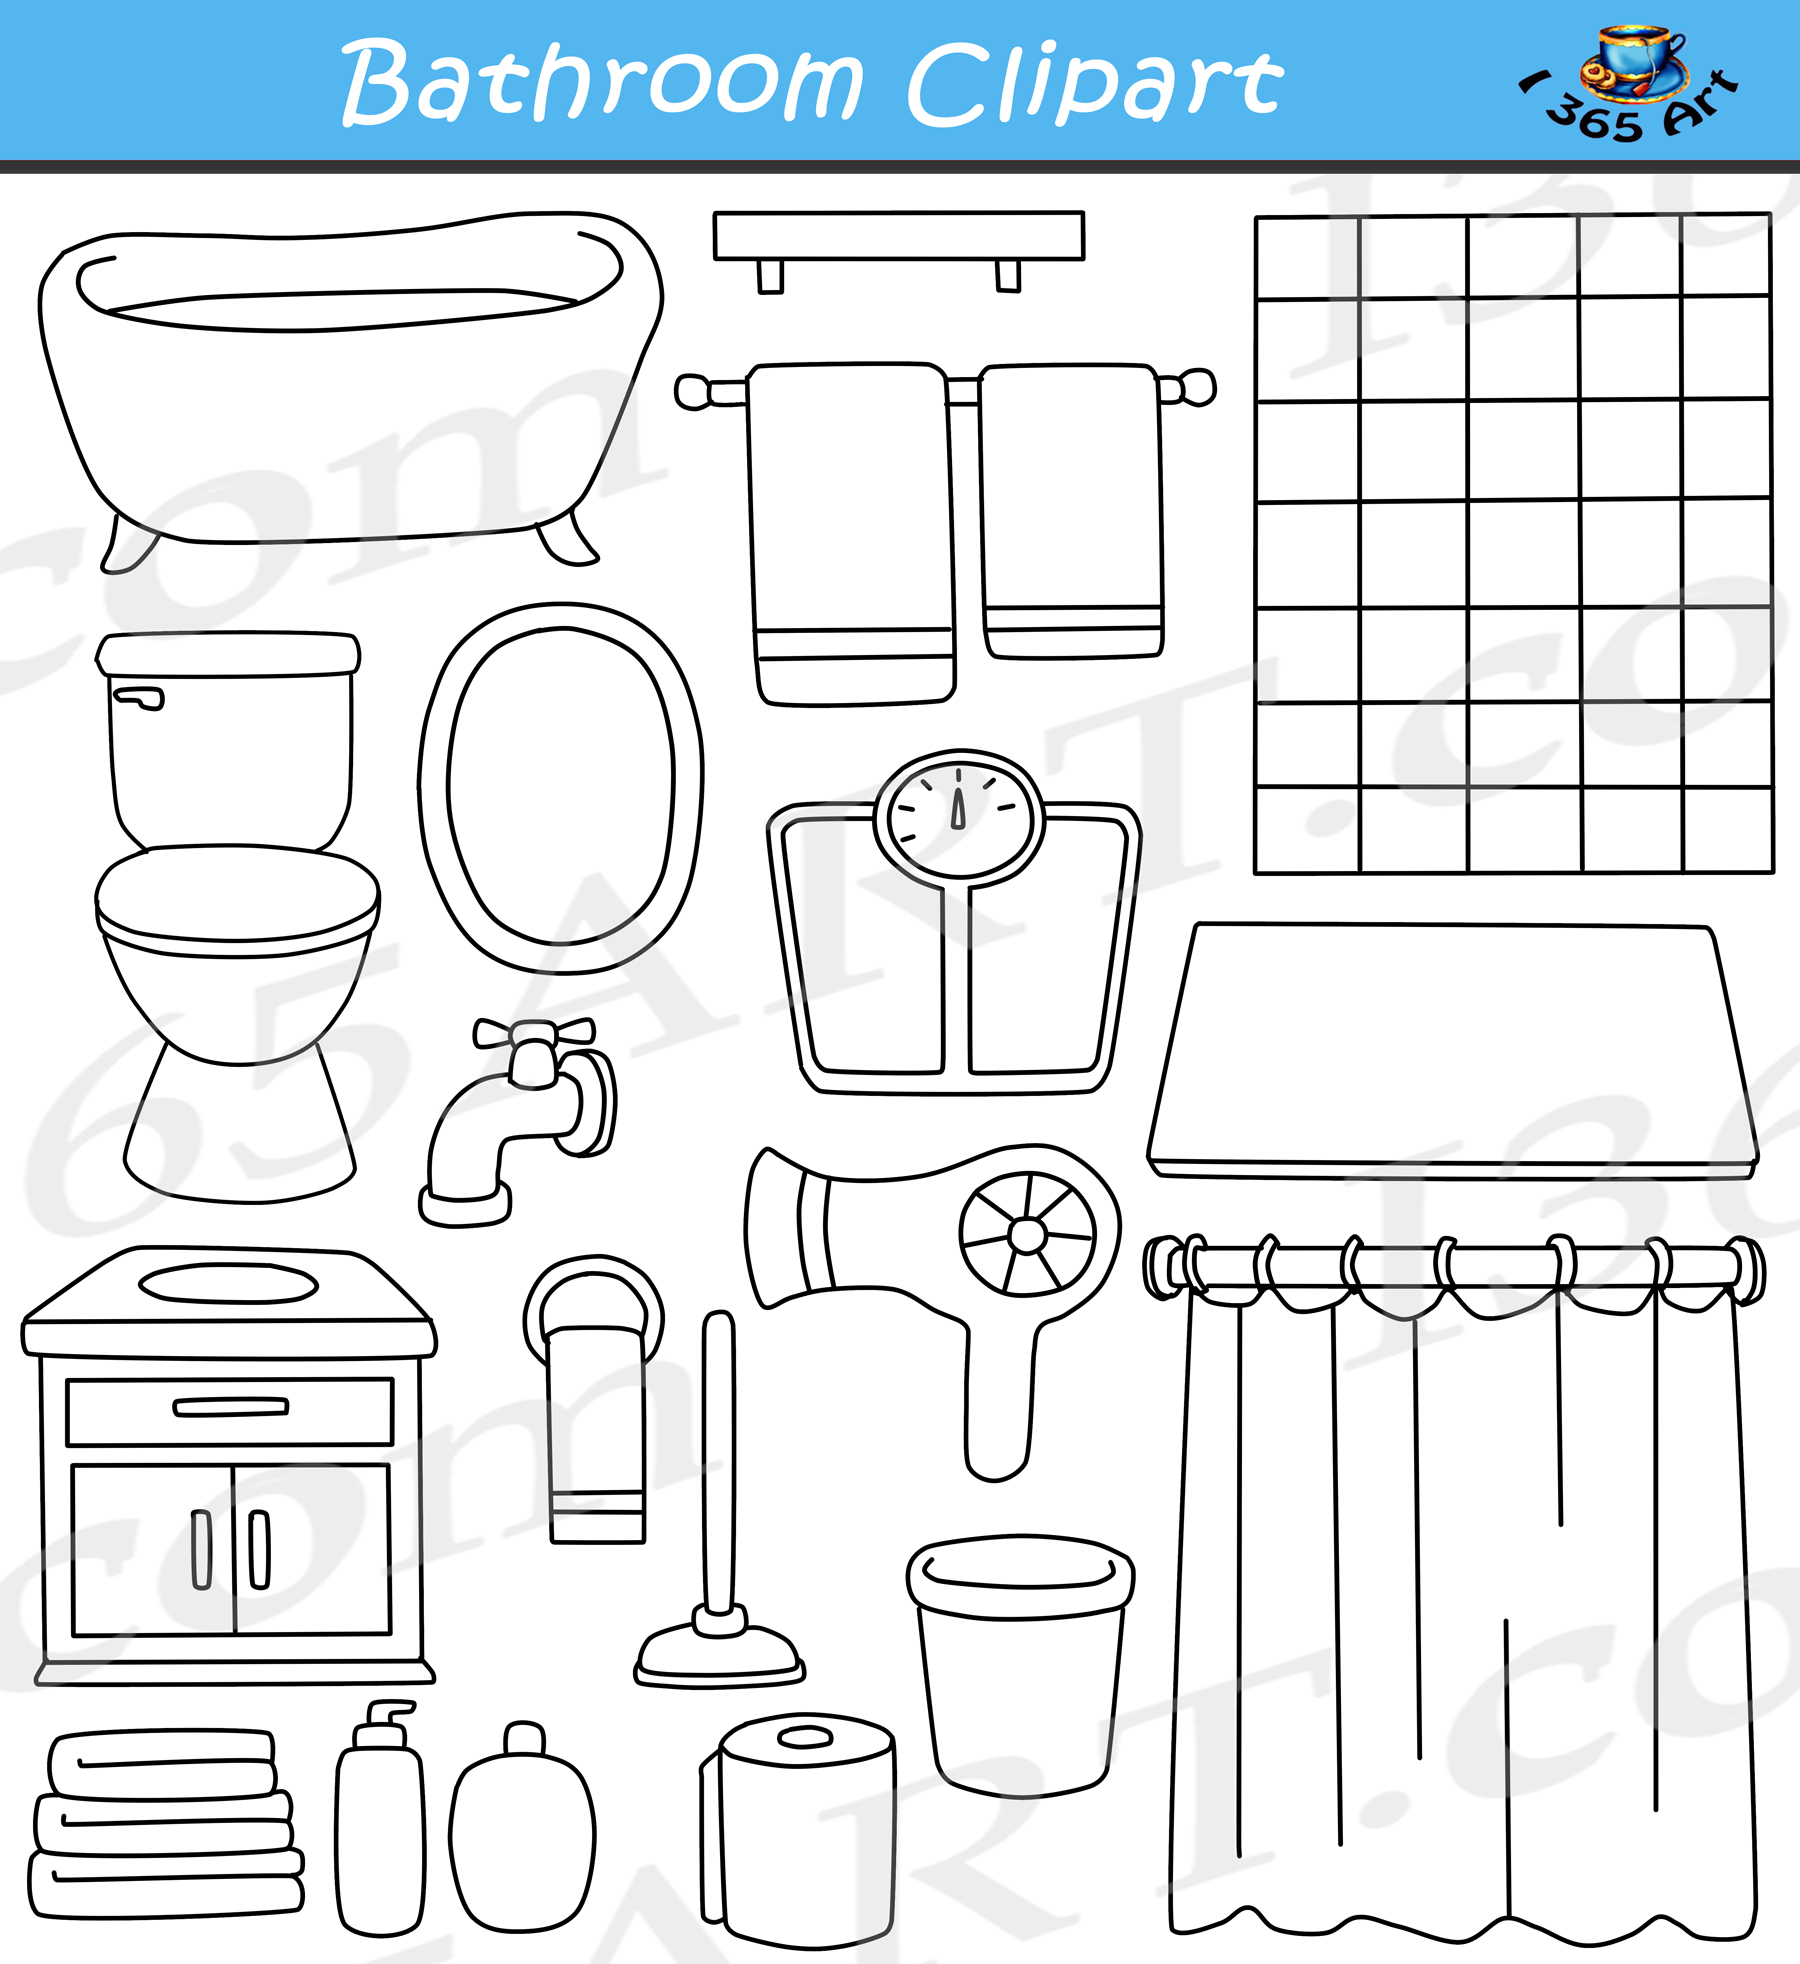 Bathroom clipart black and white. Set school by